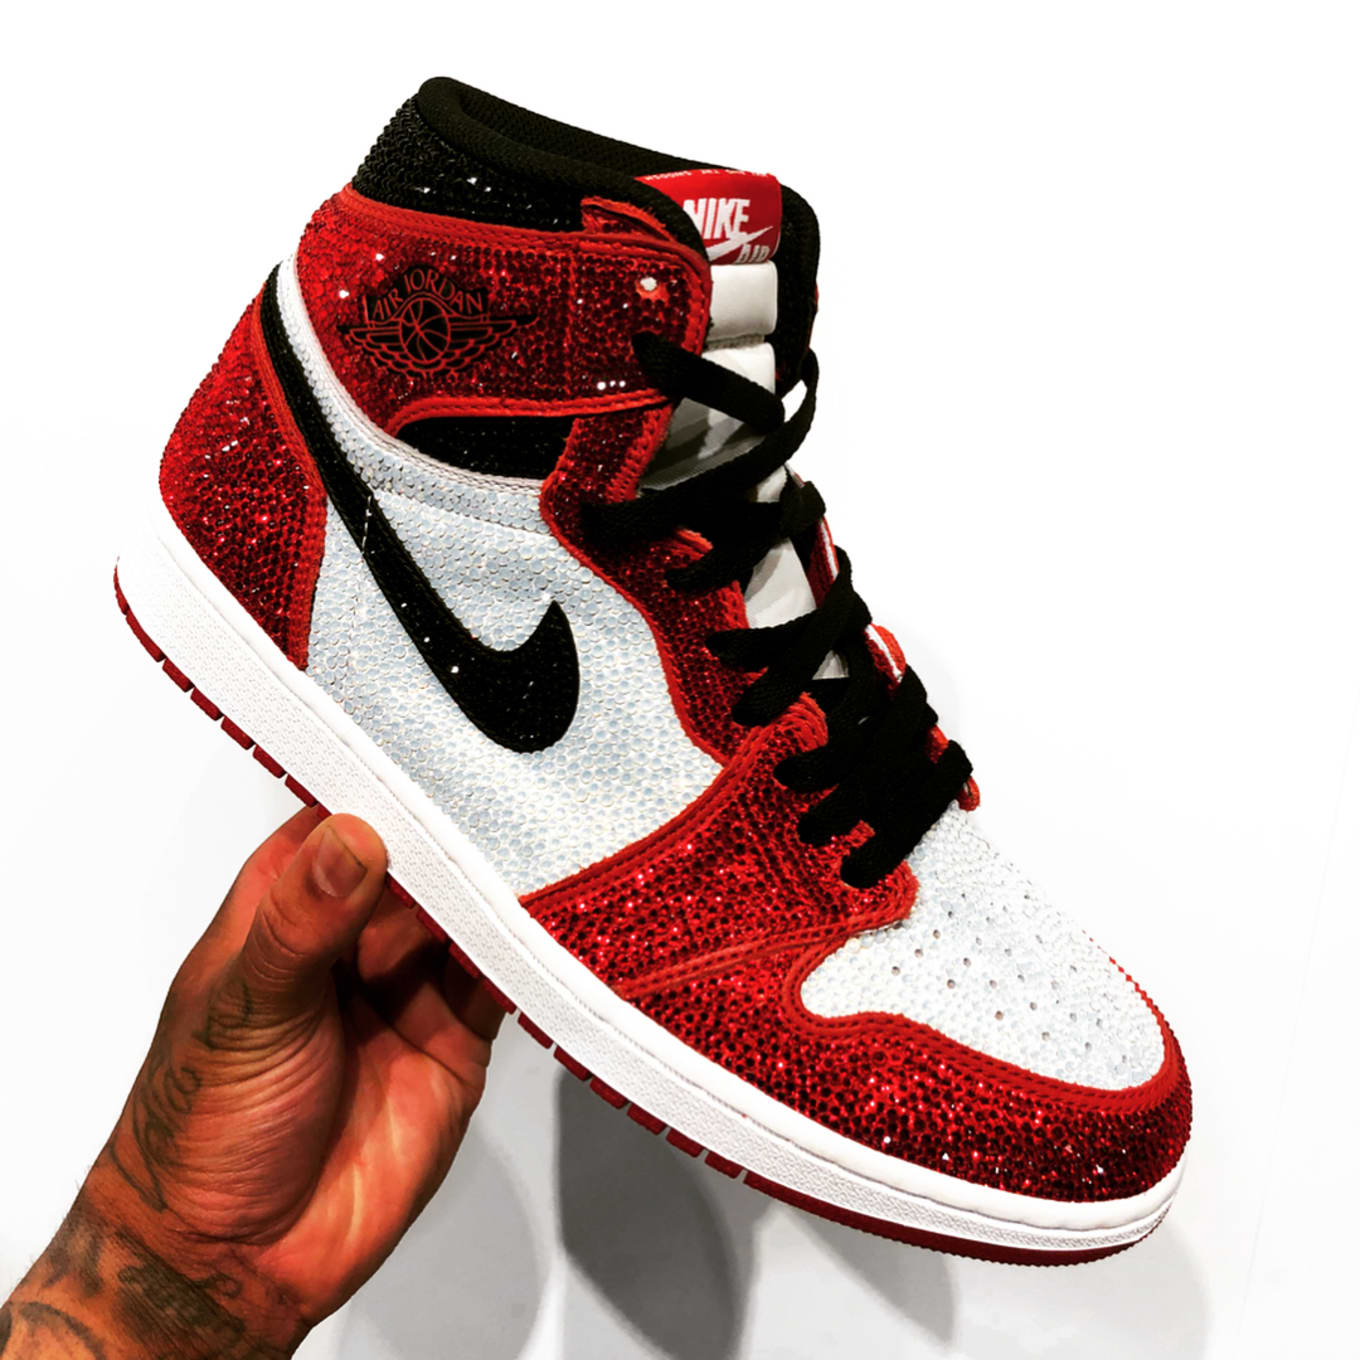 Crystal Air Jordan 1 Chicago by Daniel Jacob | Sole Collector